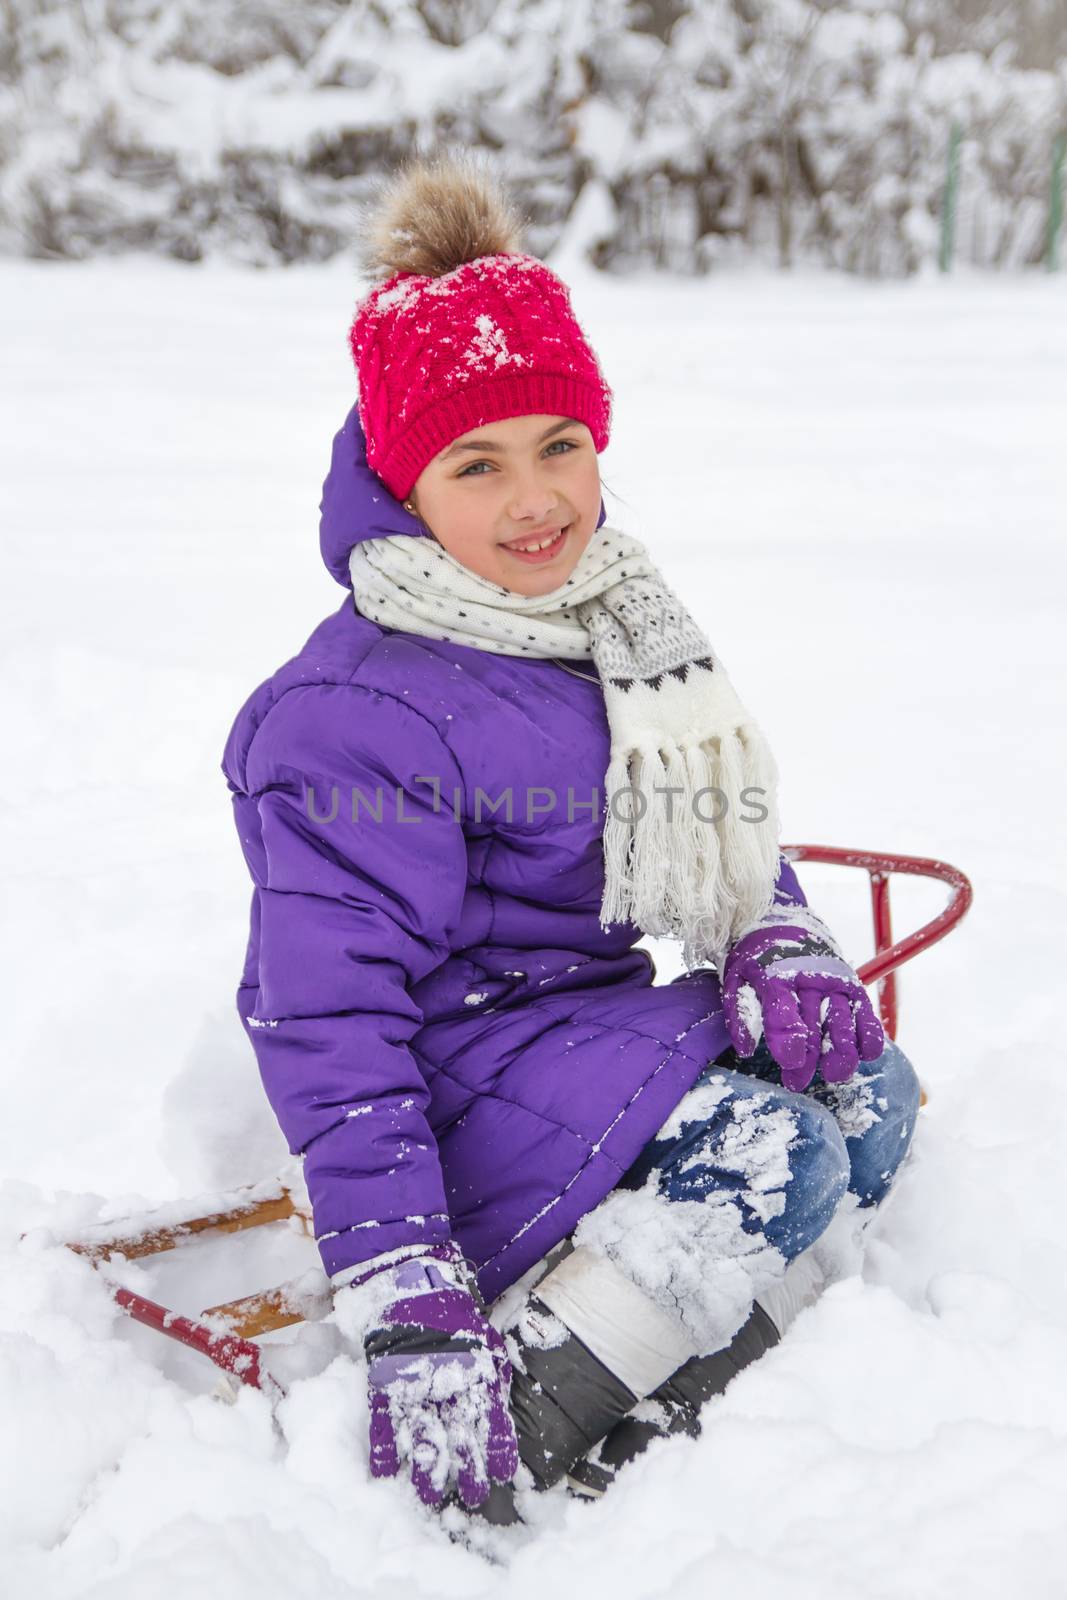 Child girl in snowy park on sledge by Angel_a